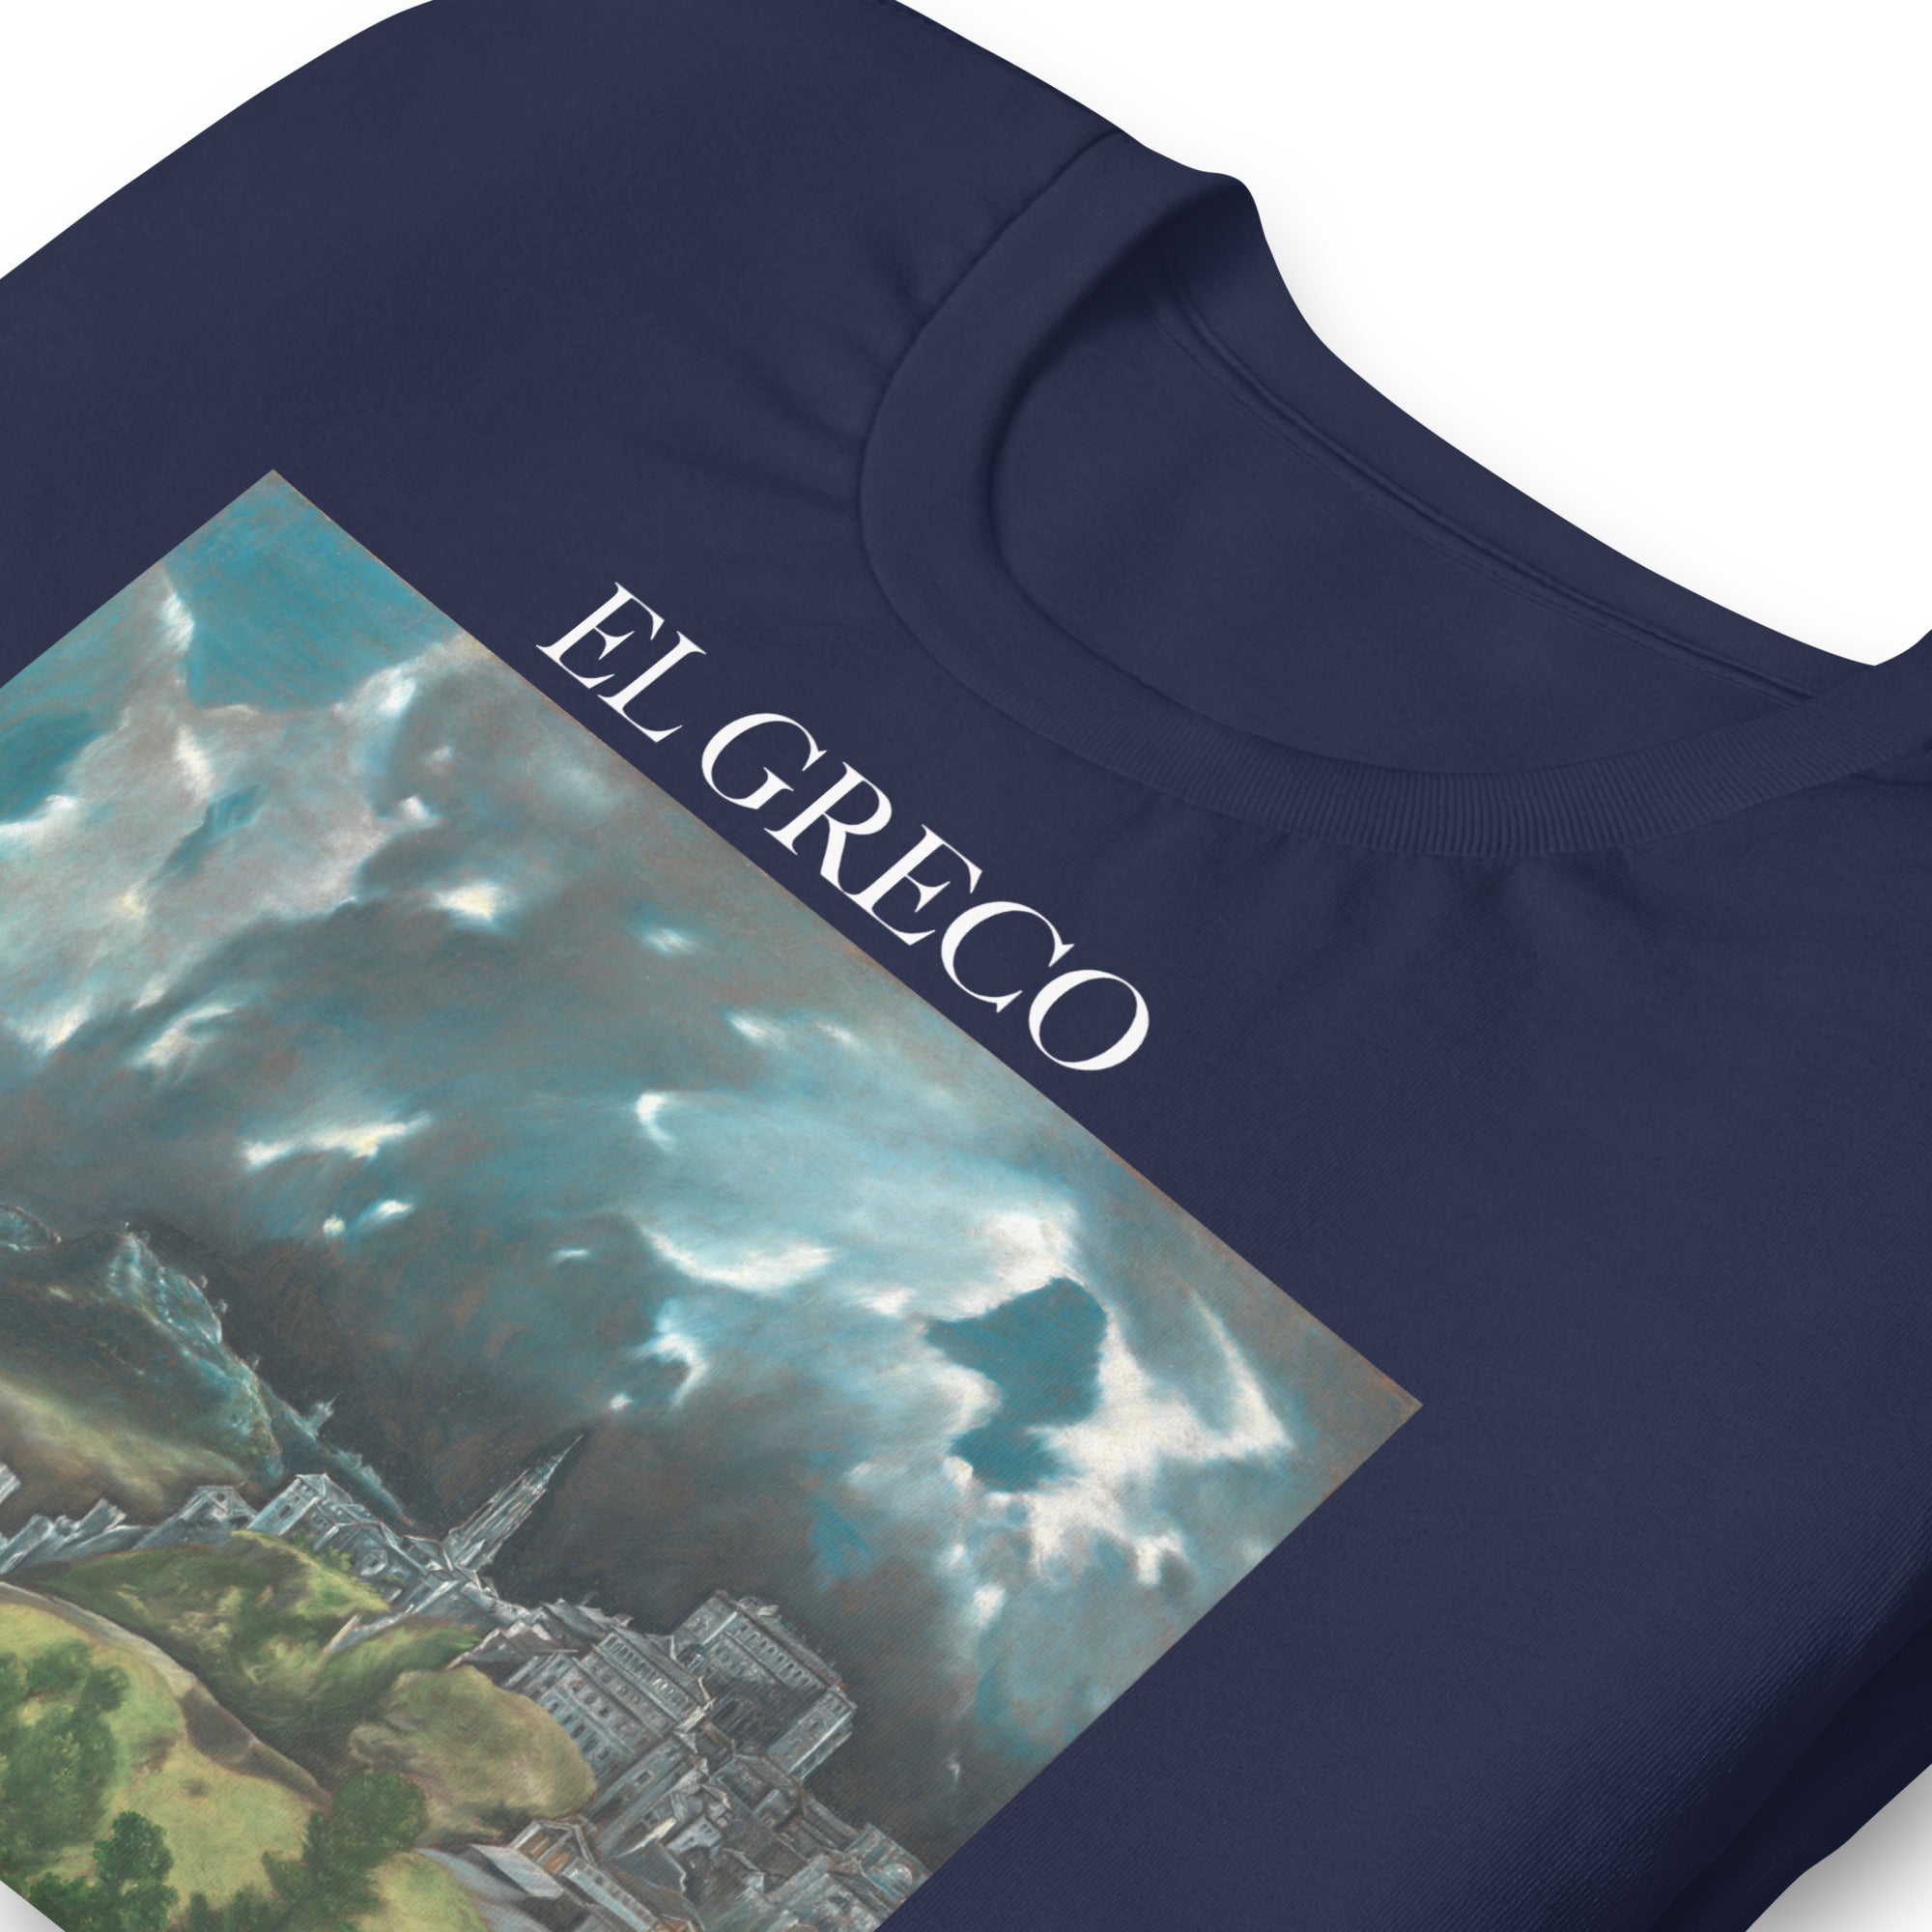 El Greco 'View of Toledo' Famous Painting T-Shirt | Unisex Classic Art Tee